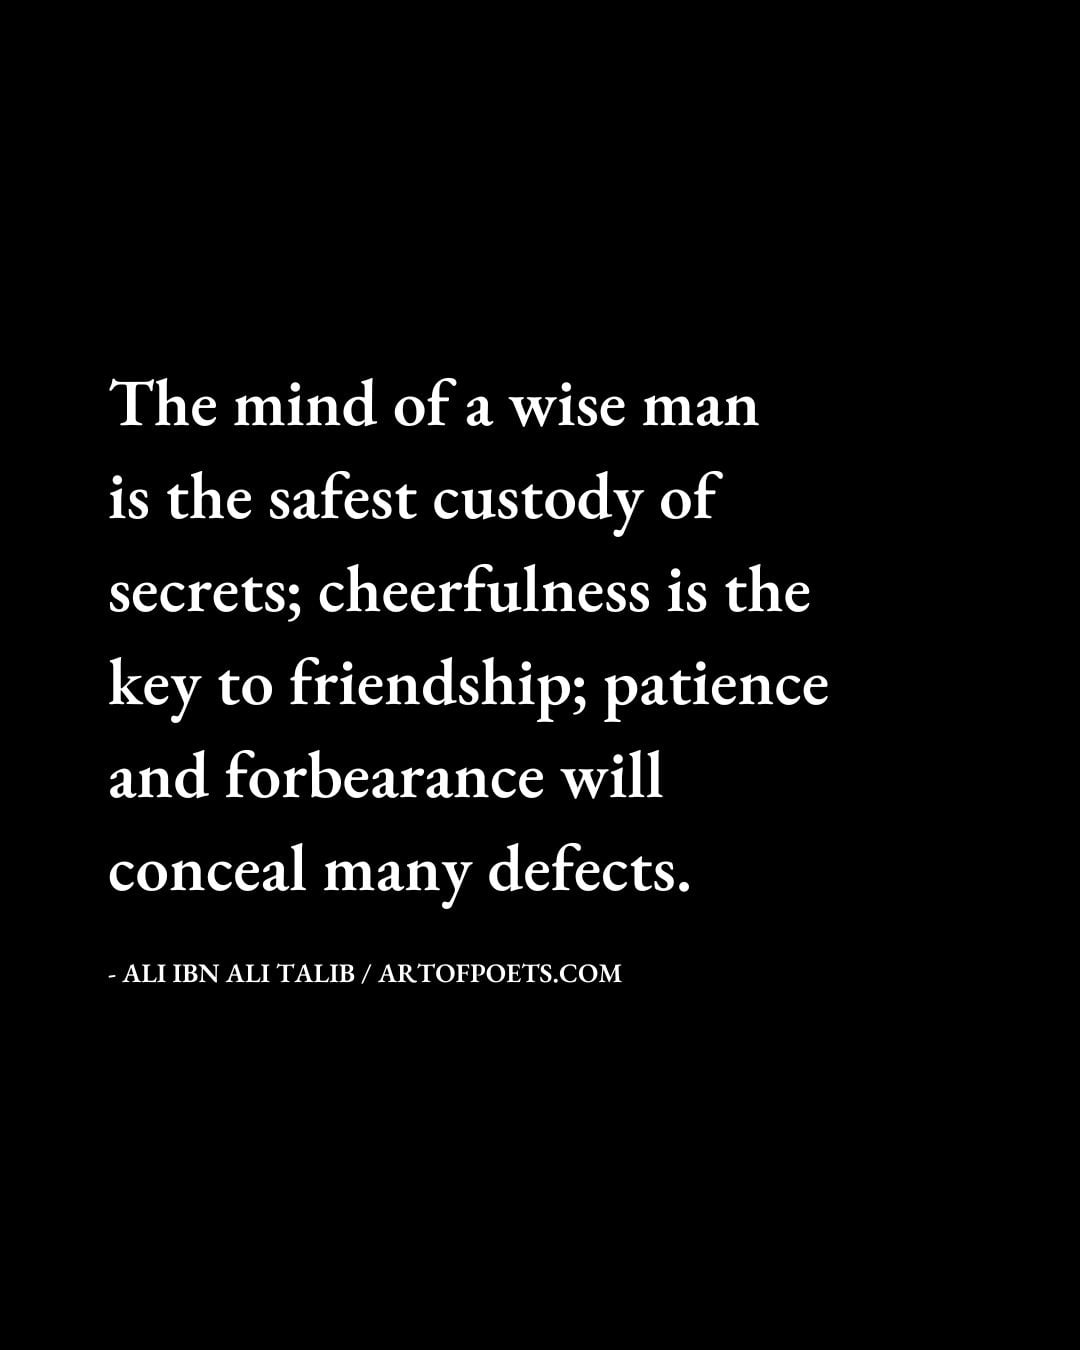 The mind of a wise man is the safest custody of secrets cheerfulness is the key to friendship patience and forbearance will conceal many defects